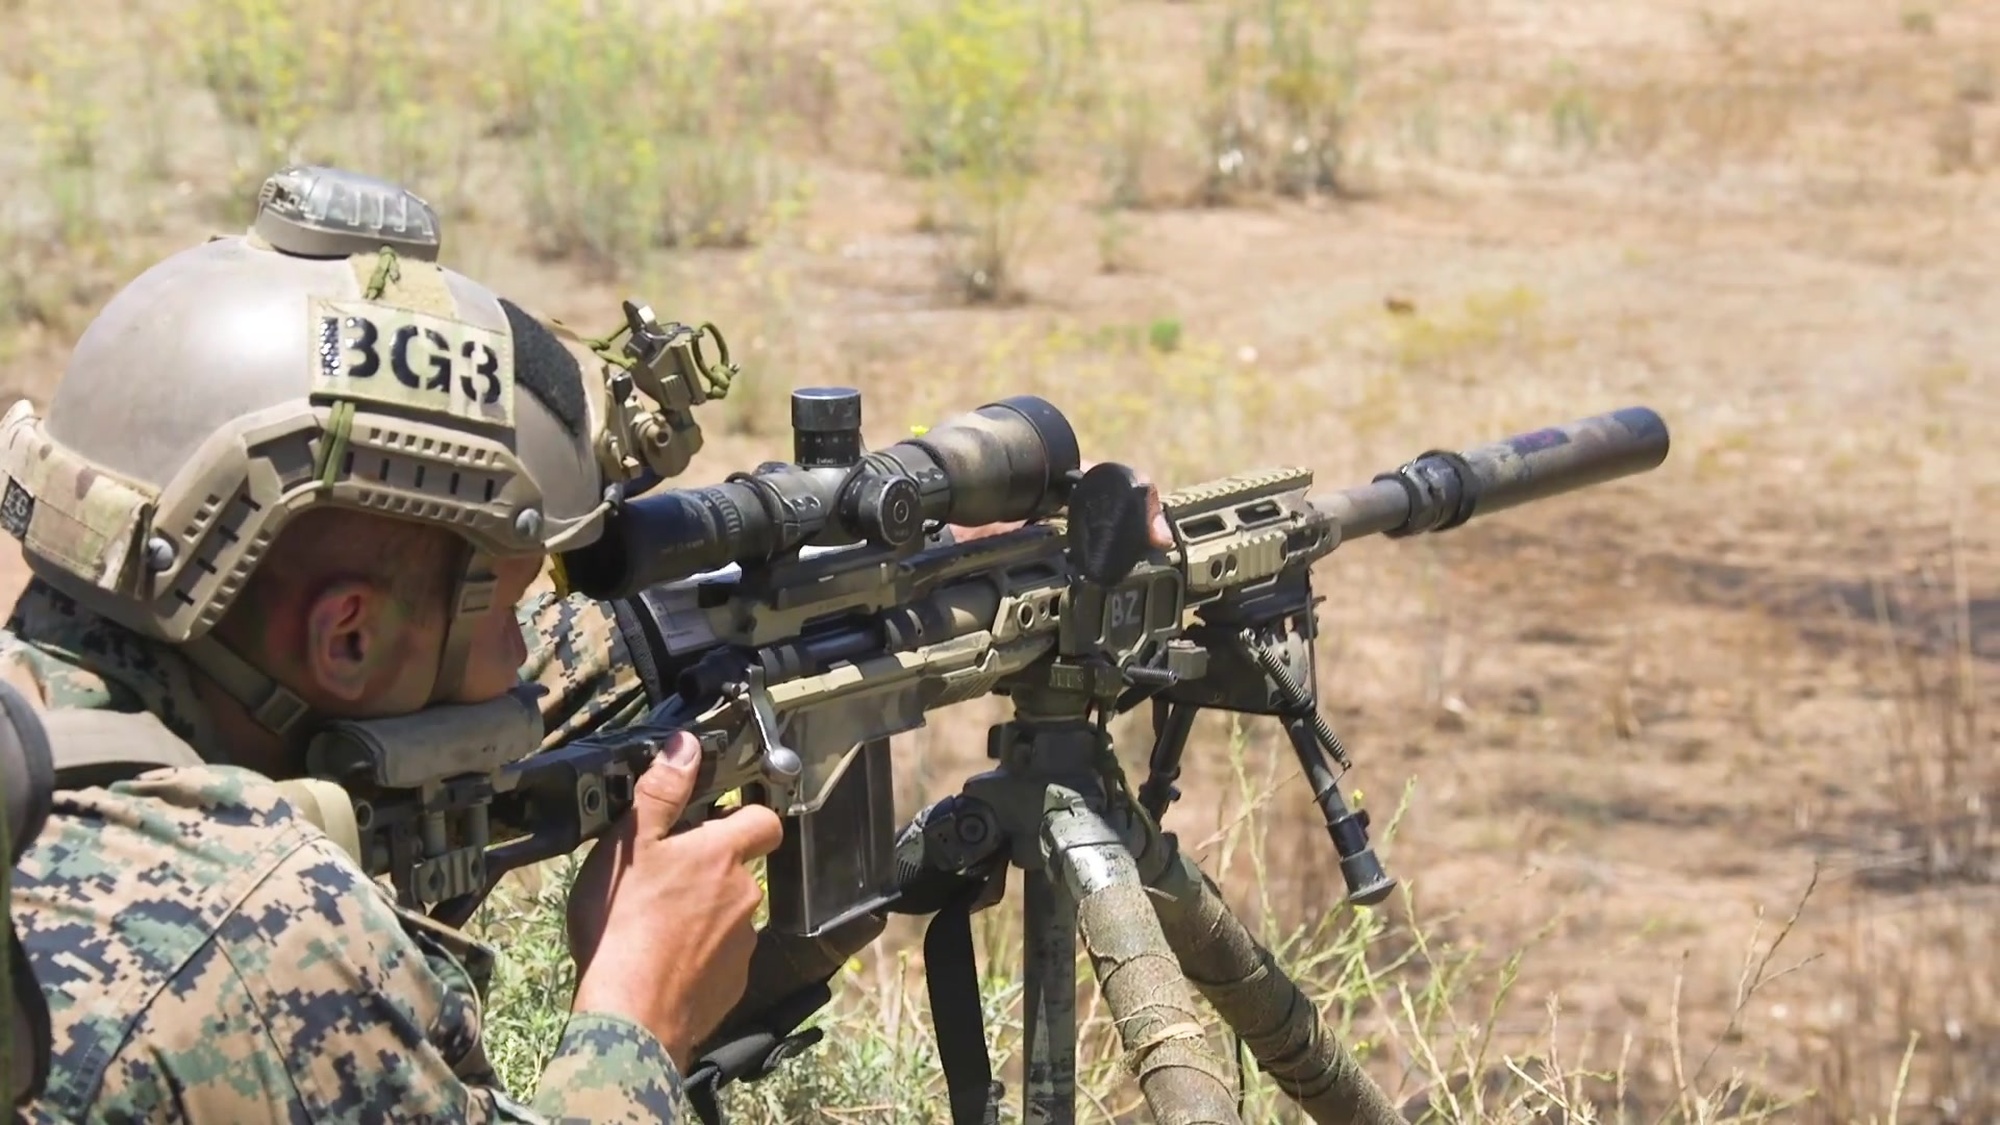 U.S. Marines with the Scout Snipers Course, Reconnaissance Training Company, Advanced Infantry Training Battalion, School of Infantry - West, fire M40A6 sniper rifles during a live-fire exercise on Range 223B on Marine Corps Base Camp Pendleton, California, July 23, 2020. The range was an unknown distance of fire range, designed to test the skills and strengthen the communication between the marksmen and their observers. (U.S. Marine Corps video by Lance Cpl. Anthony Alvarez